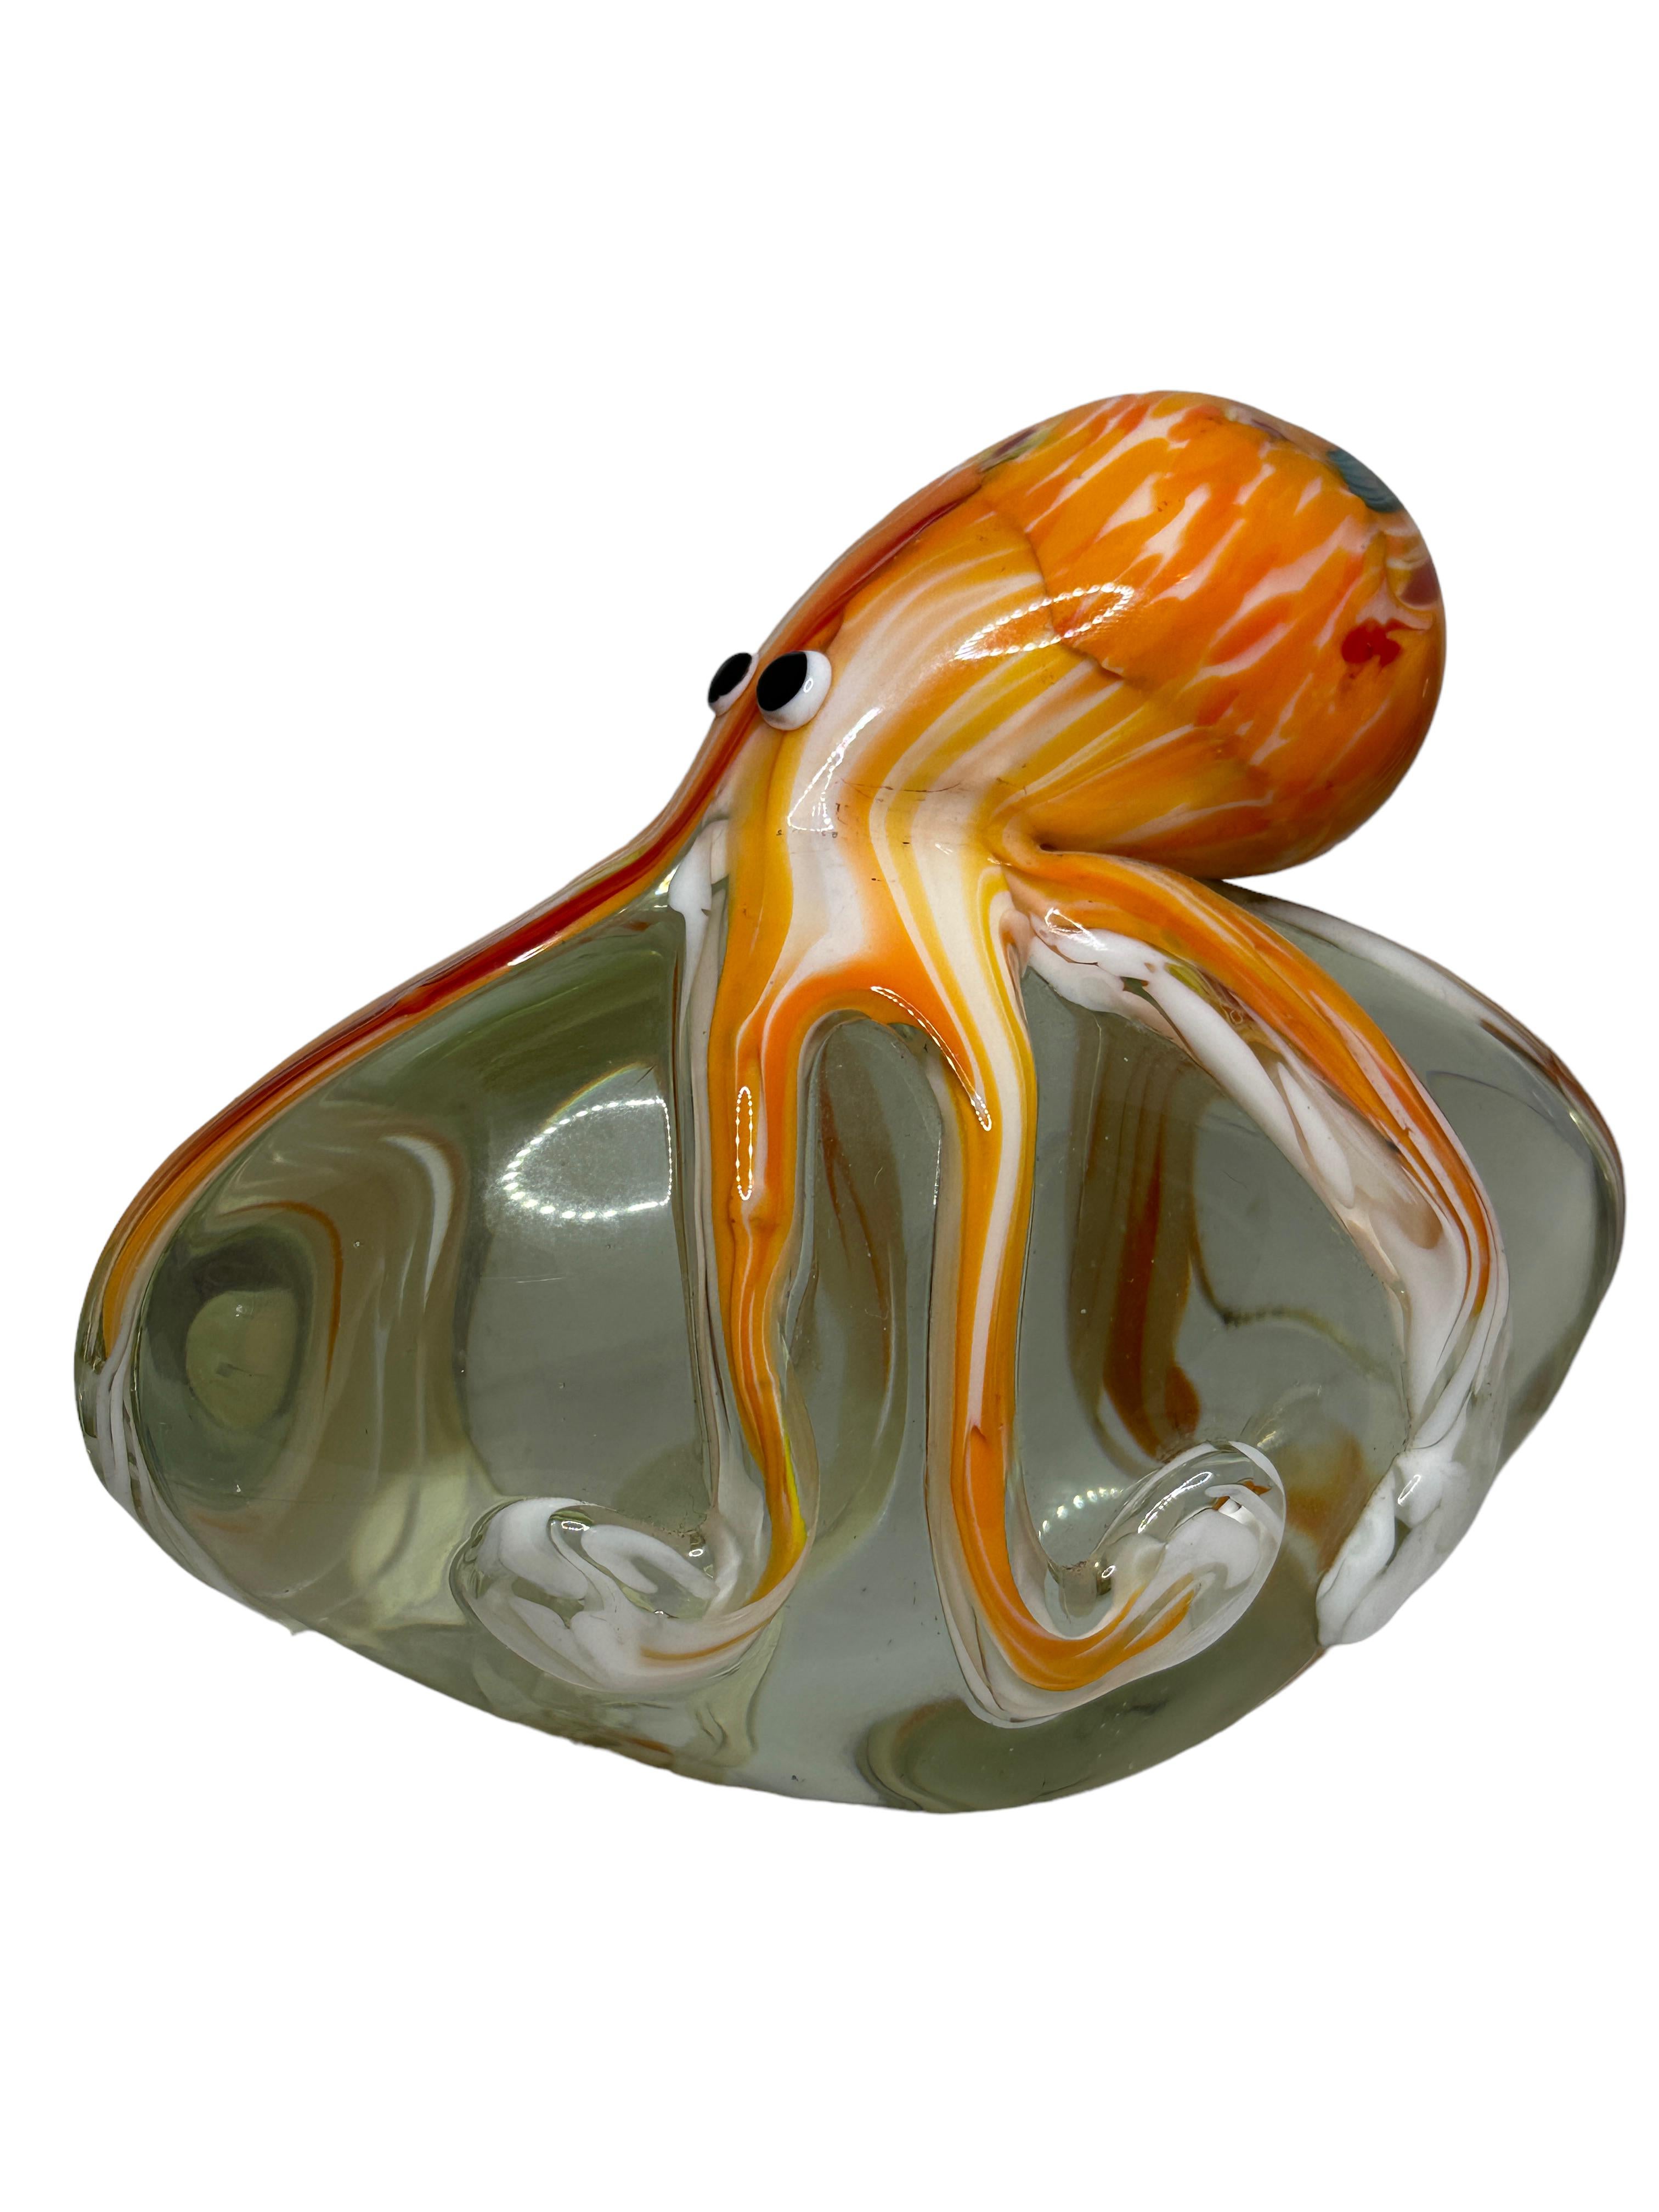 Beautiful Murano hand blown aquarium Italian art glass paper weight. Showing a giant octopus, on a glass stone. Colors are an orange, red, white, blue and clear. A beautiful nice addition to your desktop or as a decorative piece in every room.